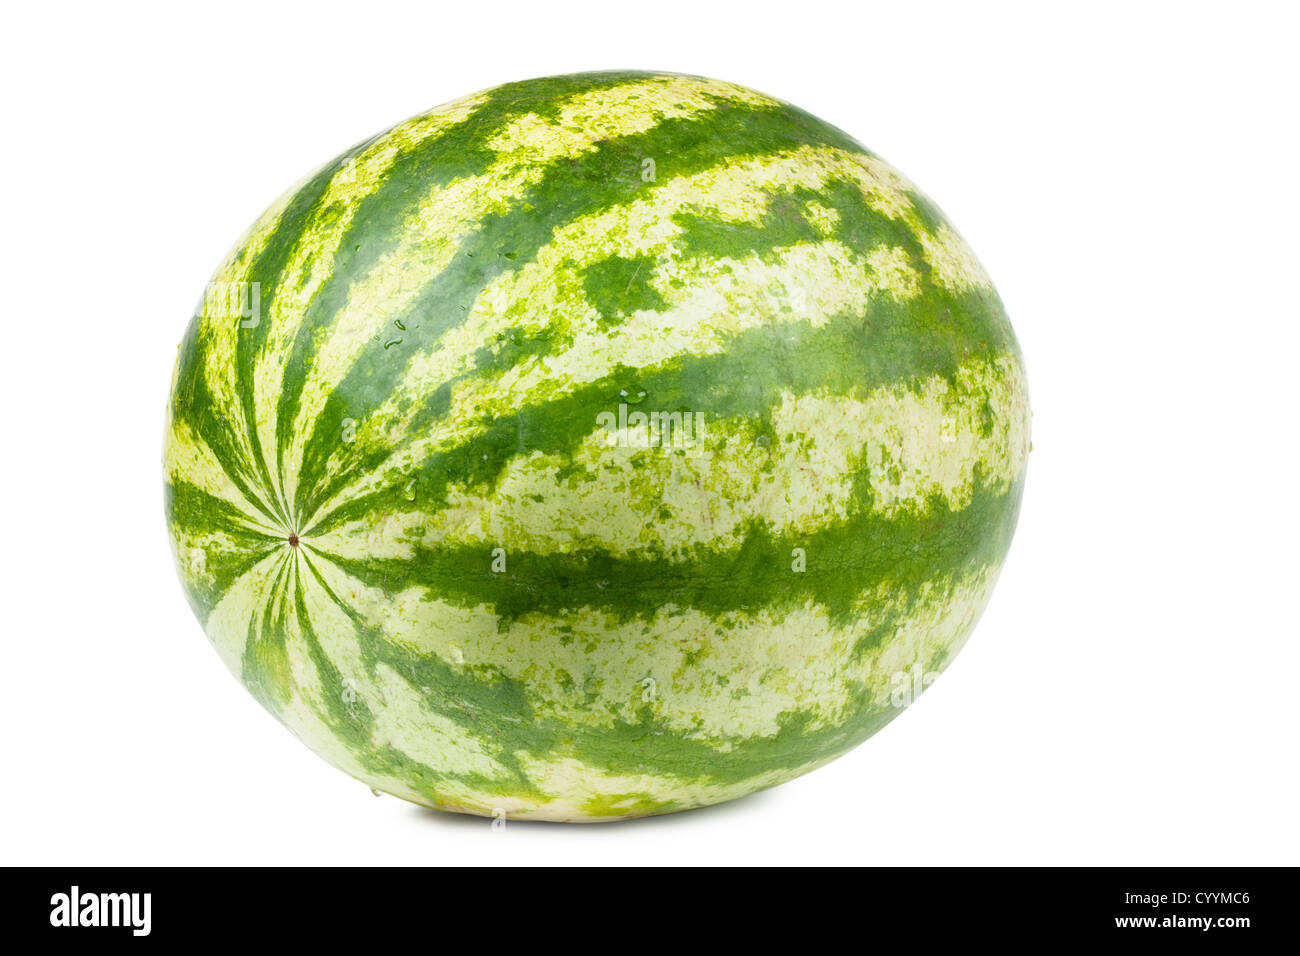 Whole fresh green watermelon isolated over white background Stock Photo